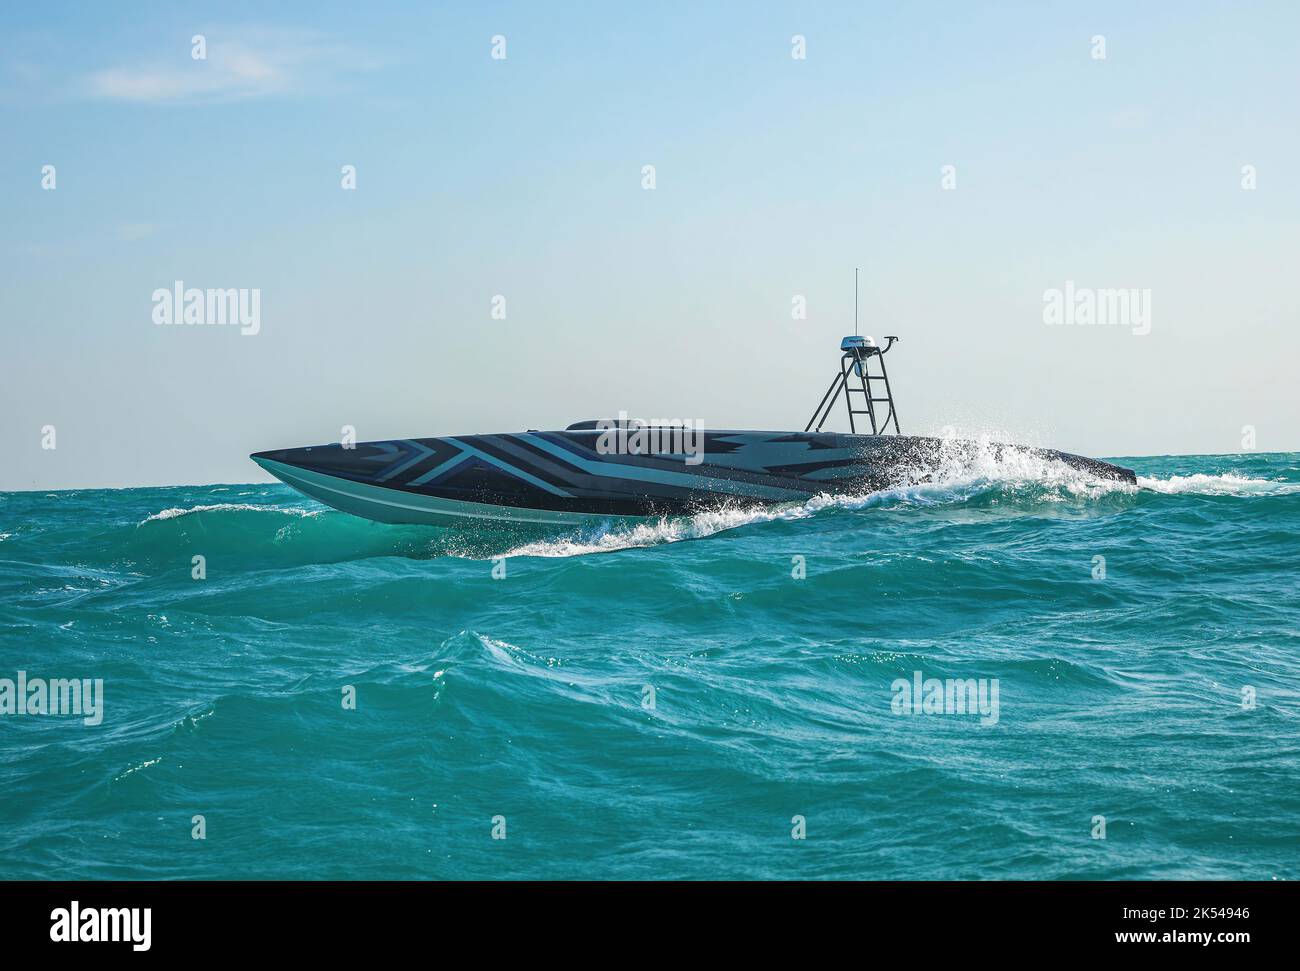 ARABIAN GULF (Dec. 4, 2021) A MANTAS T-38 unmanned surface vessel operates in the Arabian Gulf. Ongoing evaluations of new unmanned systems in U.S. 5th Fleet drives discovery, innovation, and integration into fleet operations. (U.S. Army photo by Sgt. David Resnick) Stock Photo